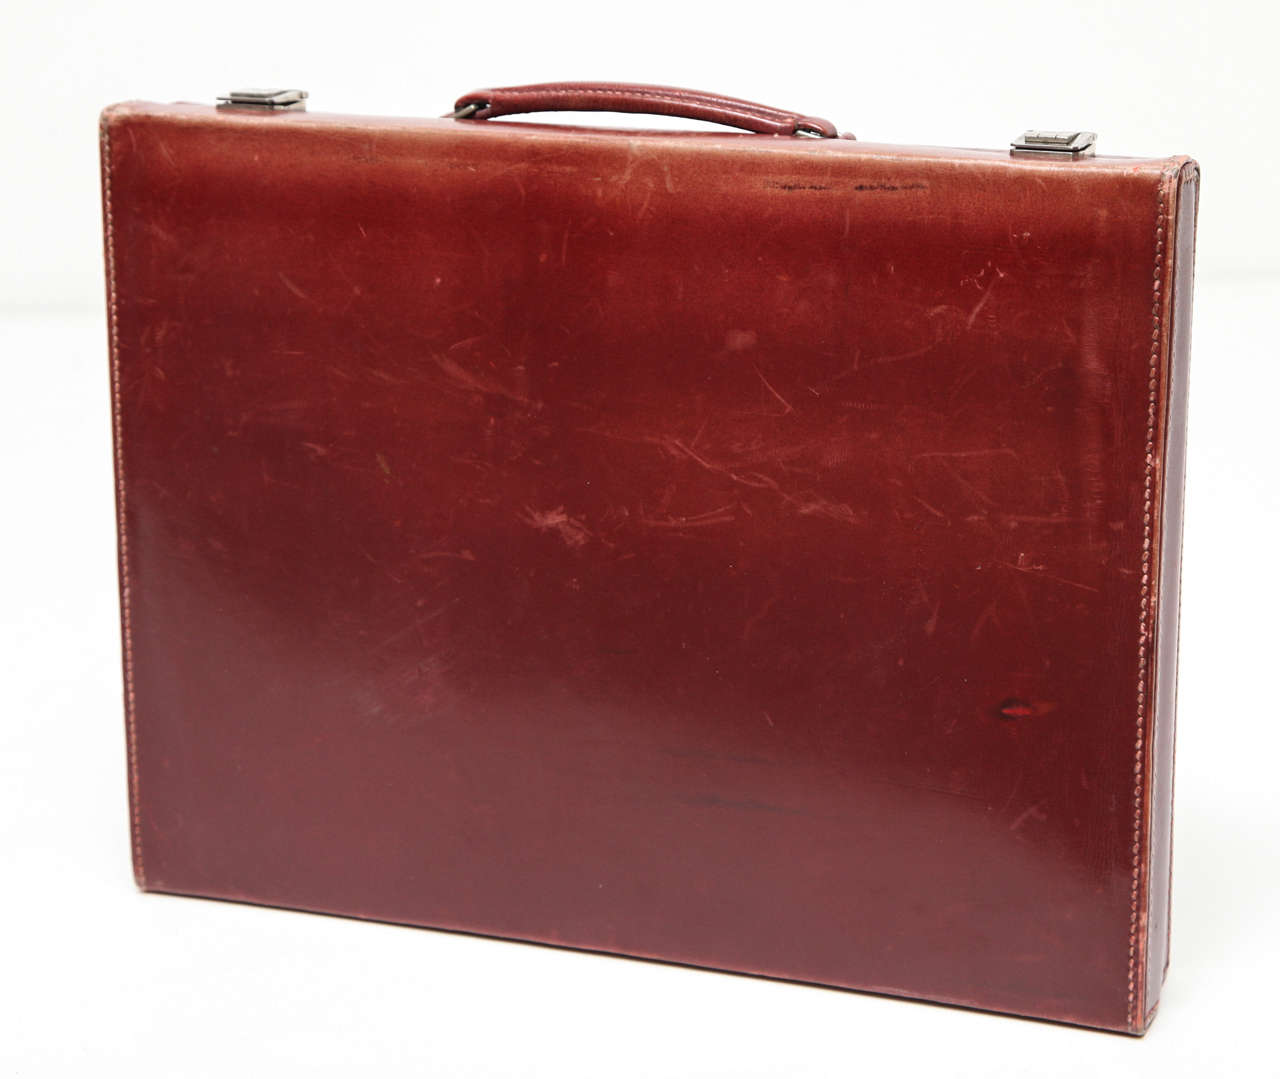 Vintage Hermès men's leather deco travel case in excellent condition. Includes nail grooming tools in a separate case (a few items missing), a brush, mirrored toiletry bottles. Case is lined with suede and latches closed. Some scuffs on case